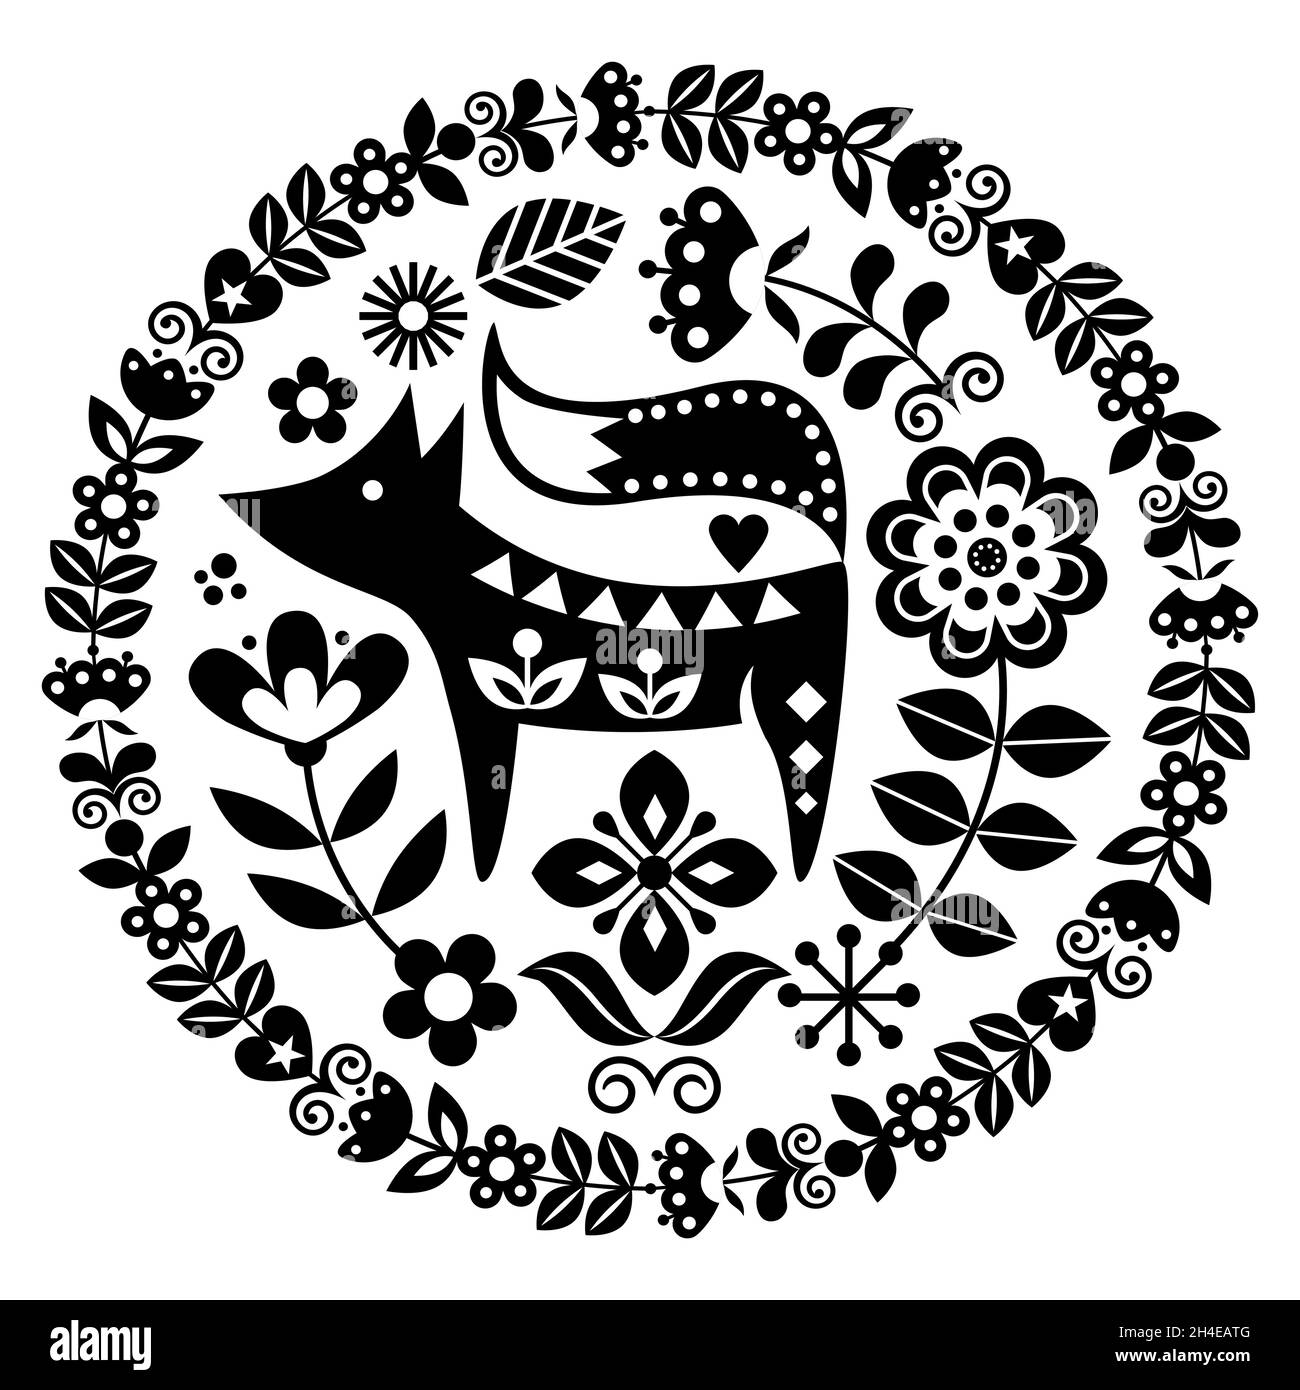 Scandinavian cute folk art vector round black and white pattern with flowers and fox, floral greeting card or invitation inspired by traditional embro Stock Vector